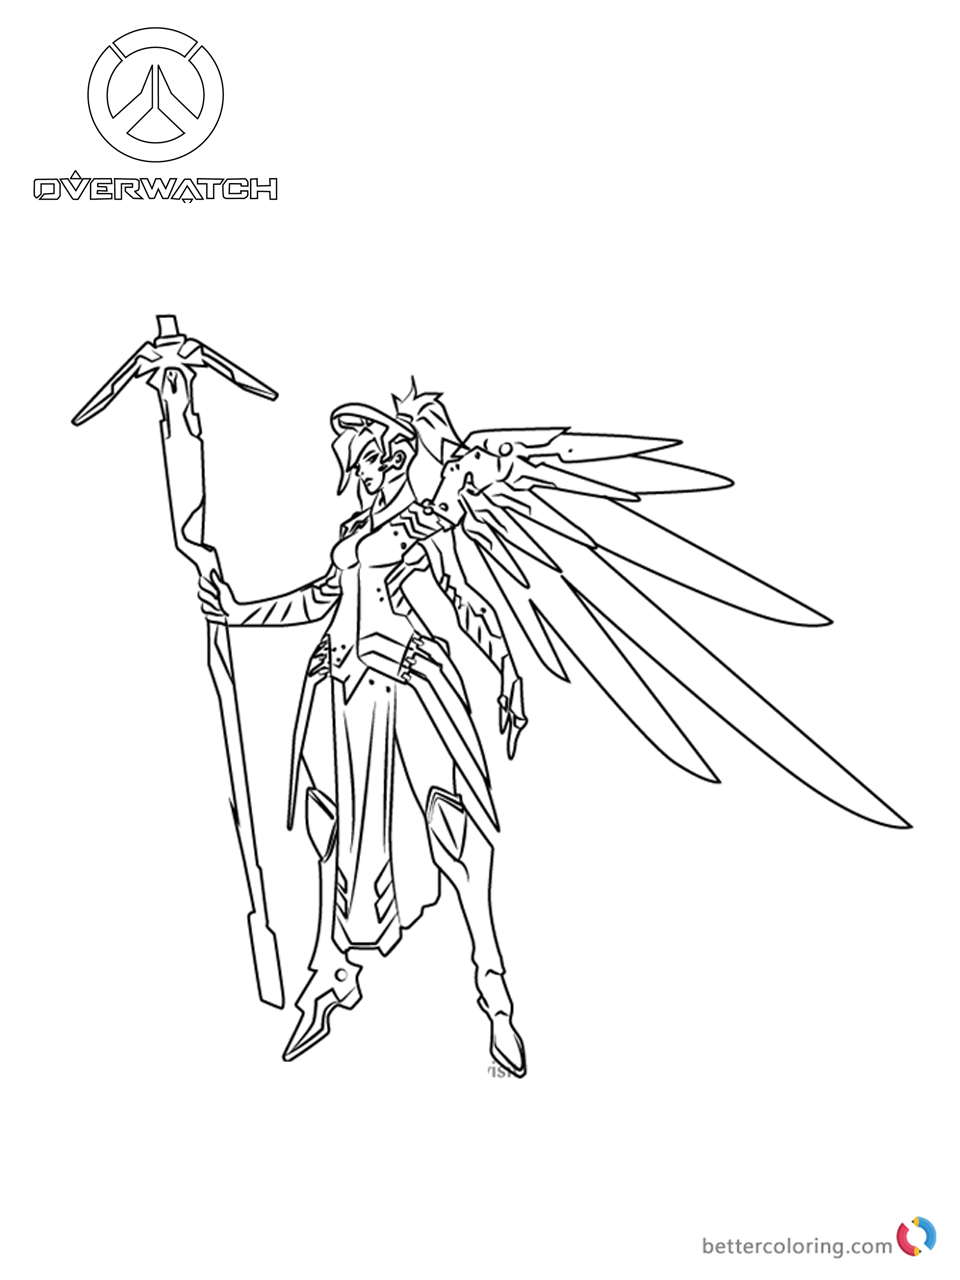 Mercy from Overwatch Coloring Pages - Free Printable Coloring Pages